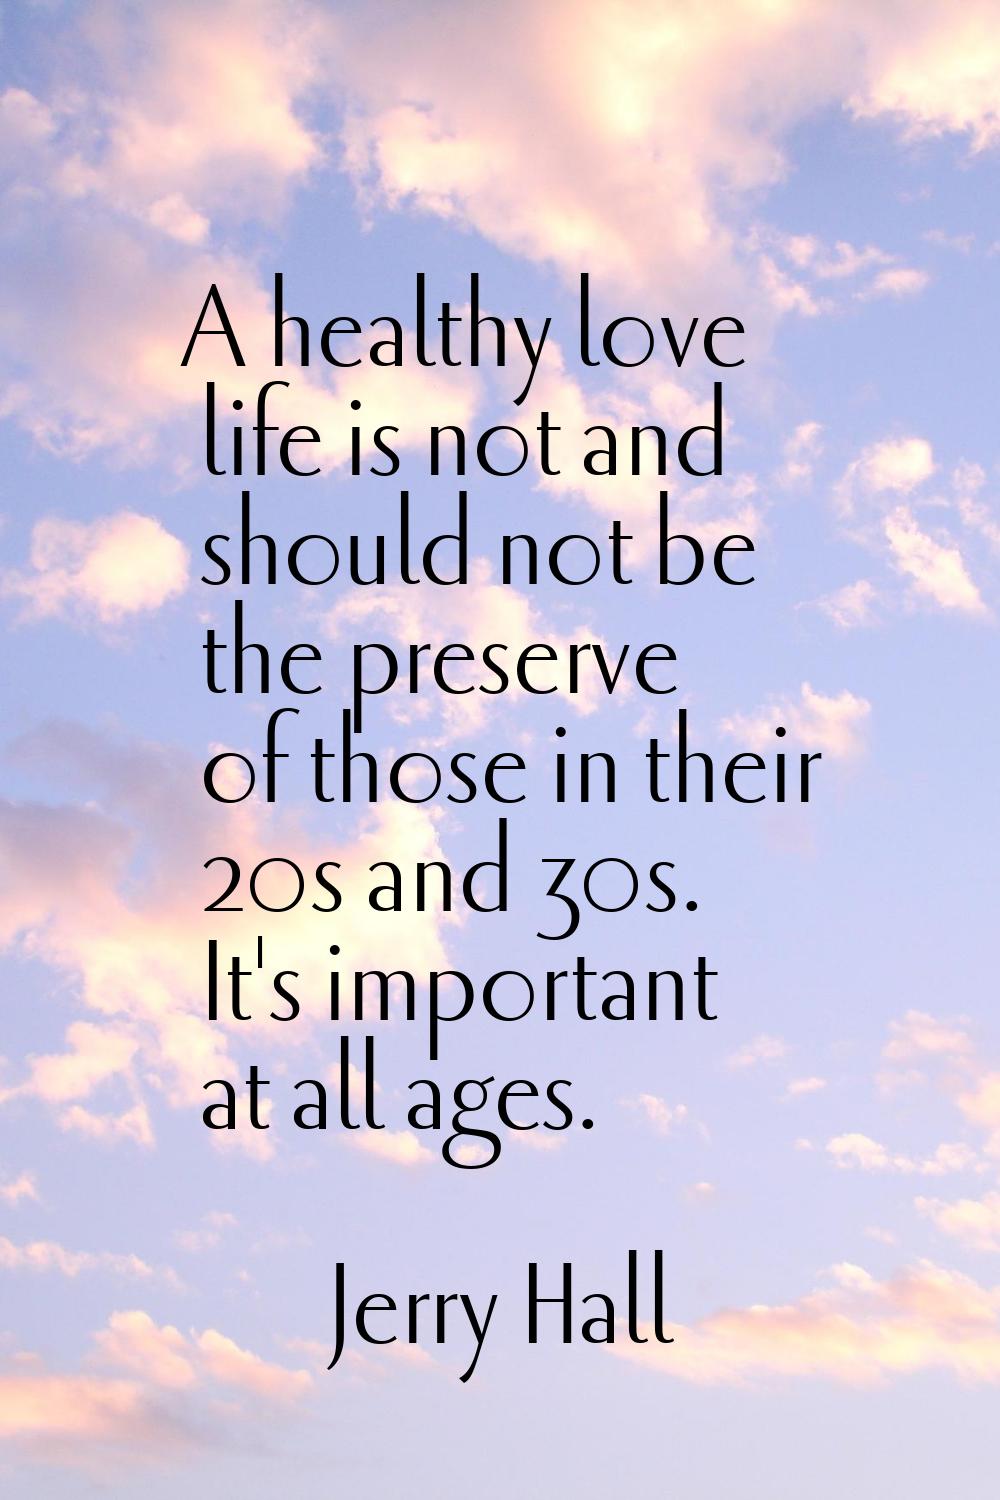 A healthy love life is not and should not be the preserve of those in their 20s and 30s. It's impor